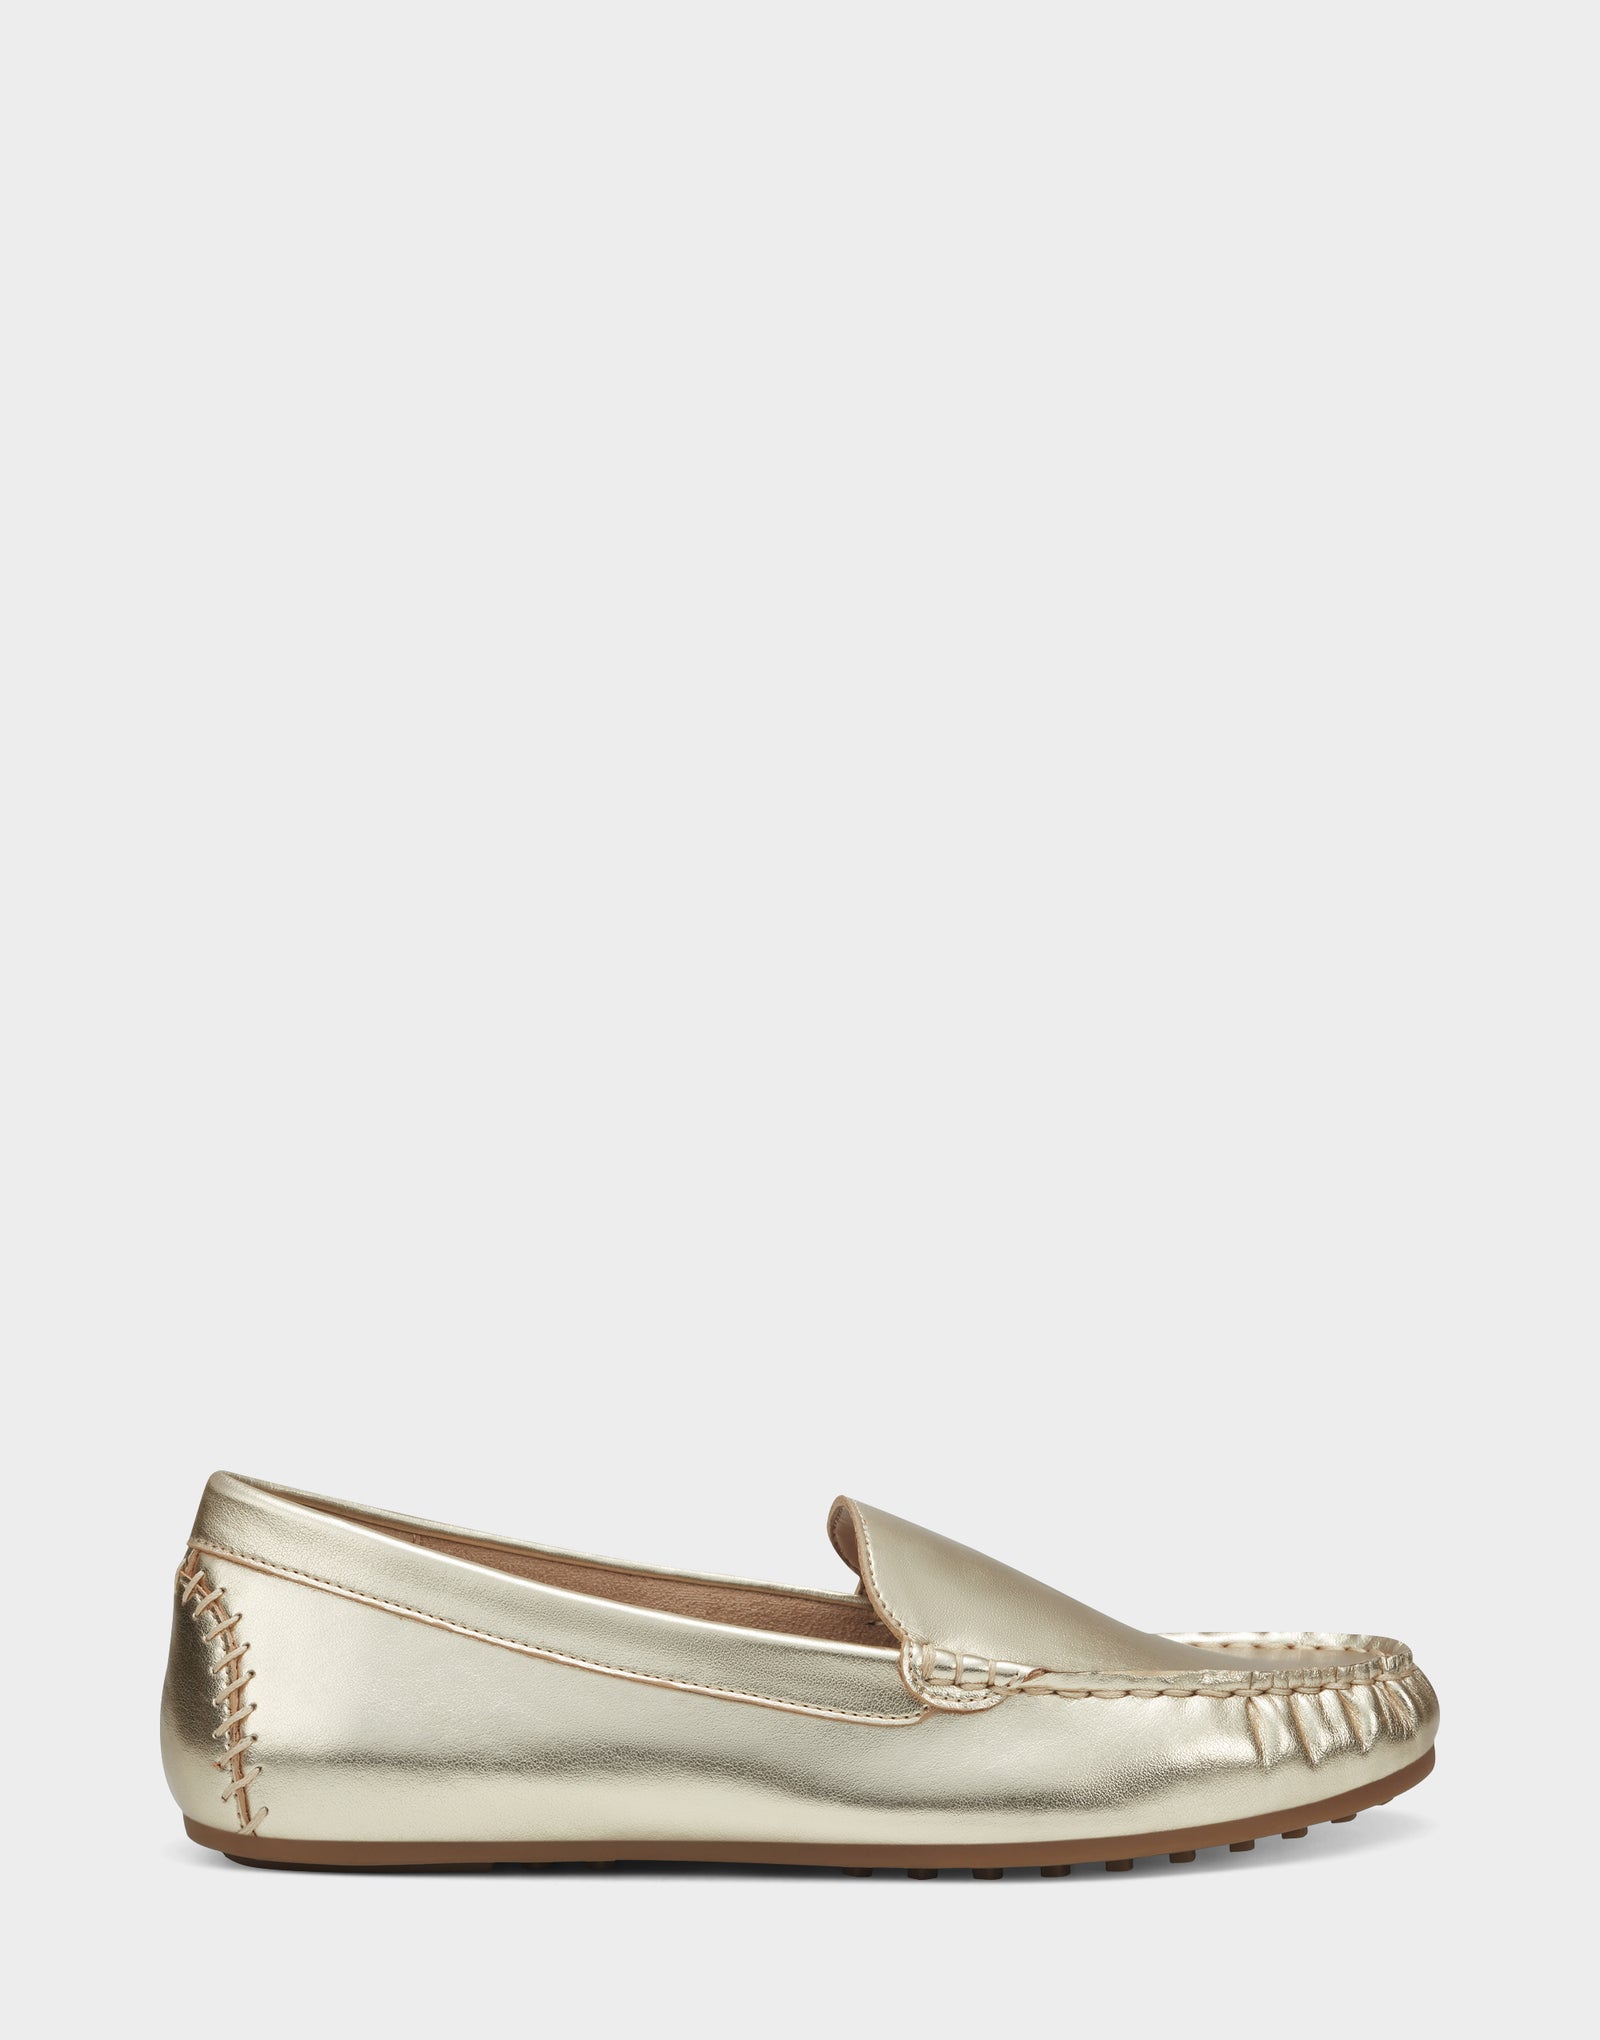 Women's Loafer in Gold